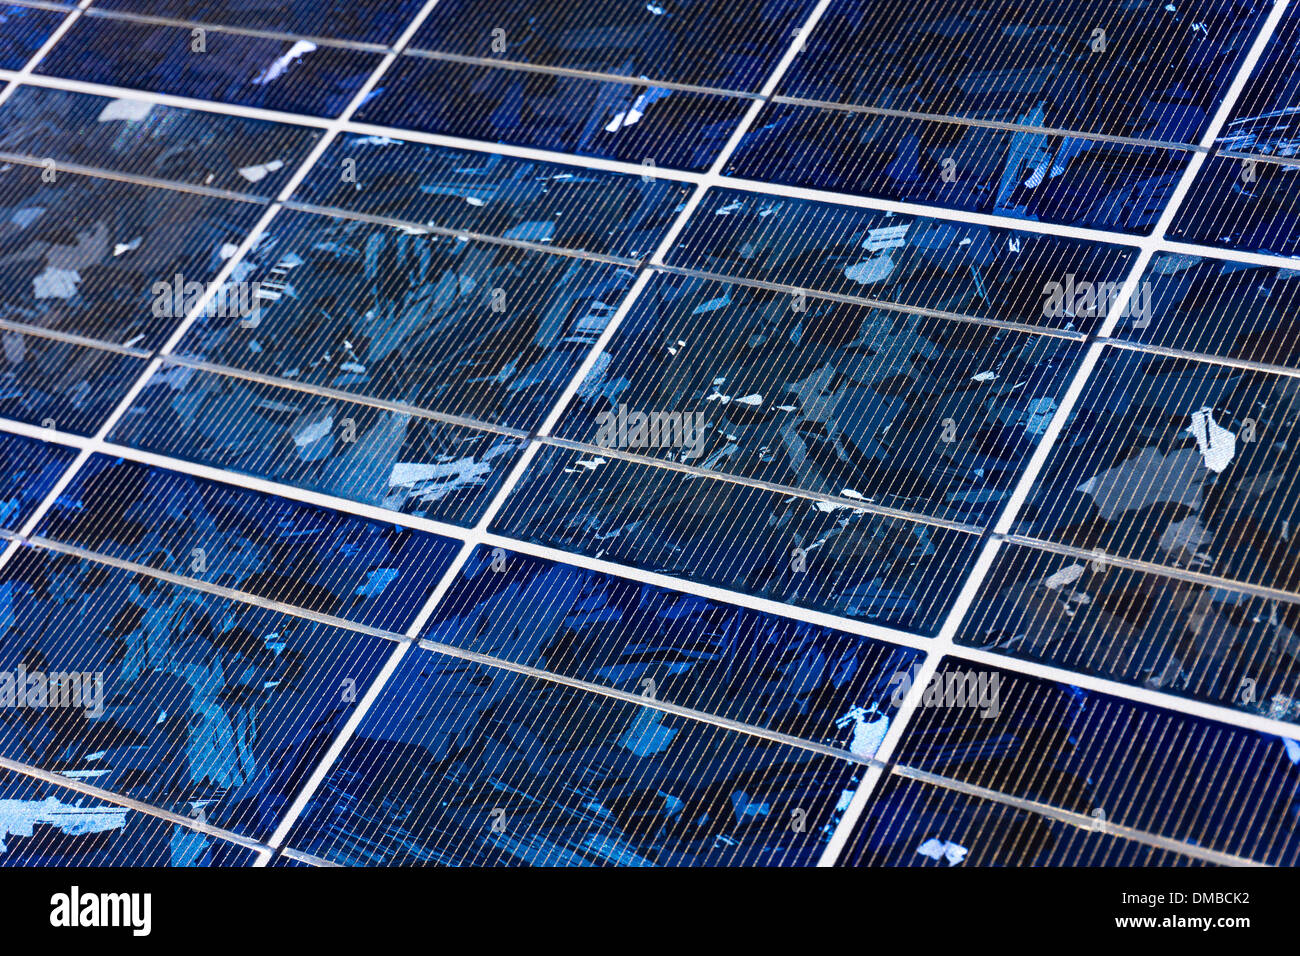 Blue photo-voltaic solar panels closeup of crystal structure Stock Photo